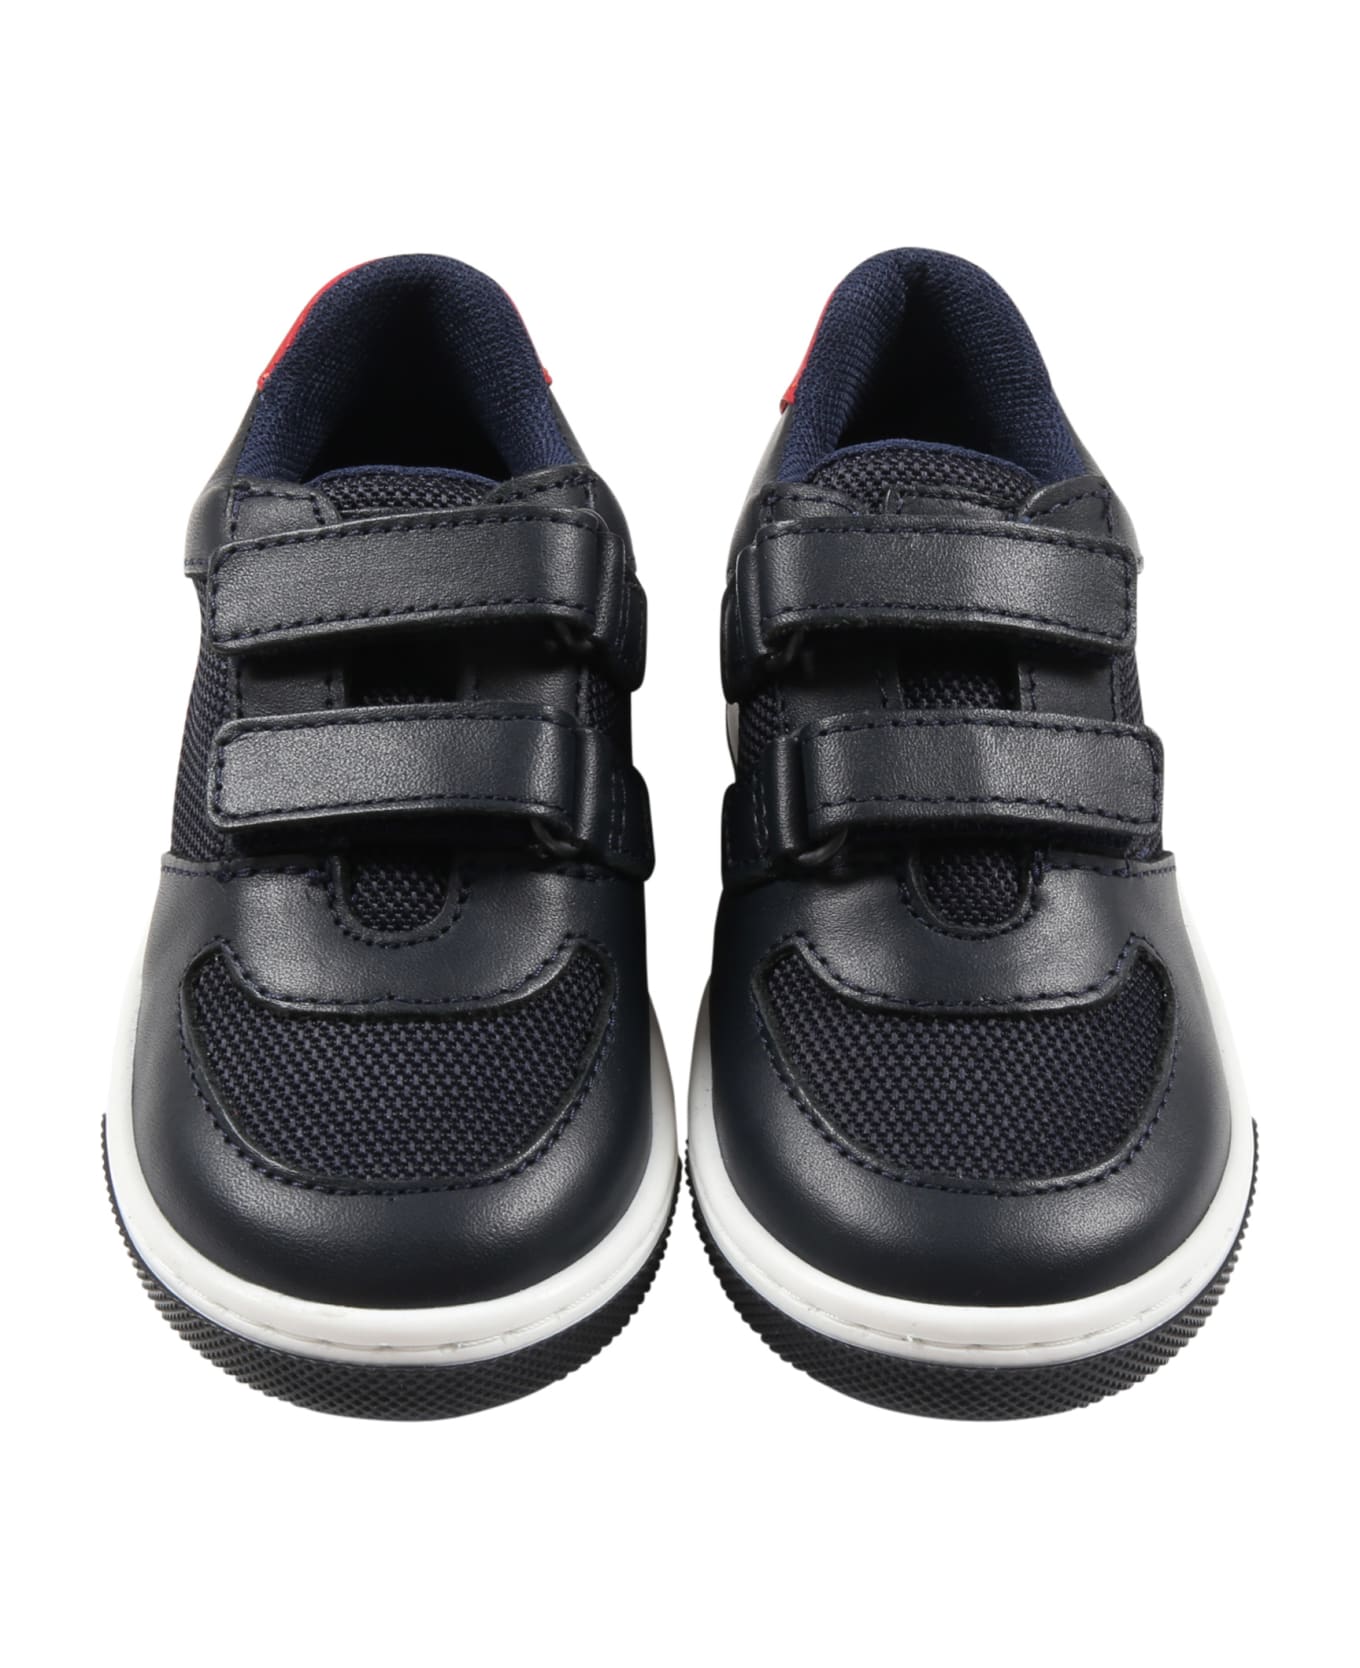 Hugo Boss Black Sneakers For Boy With Red Details - Blue